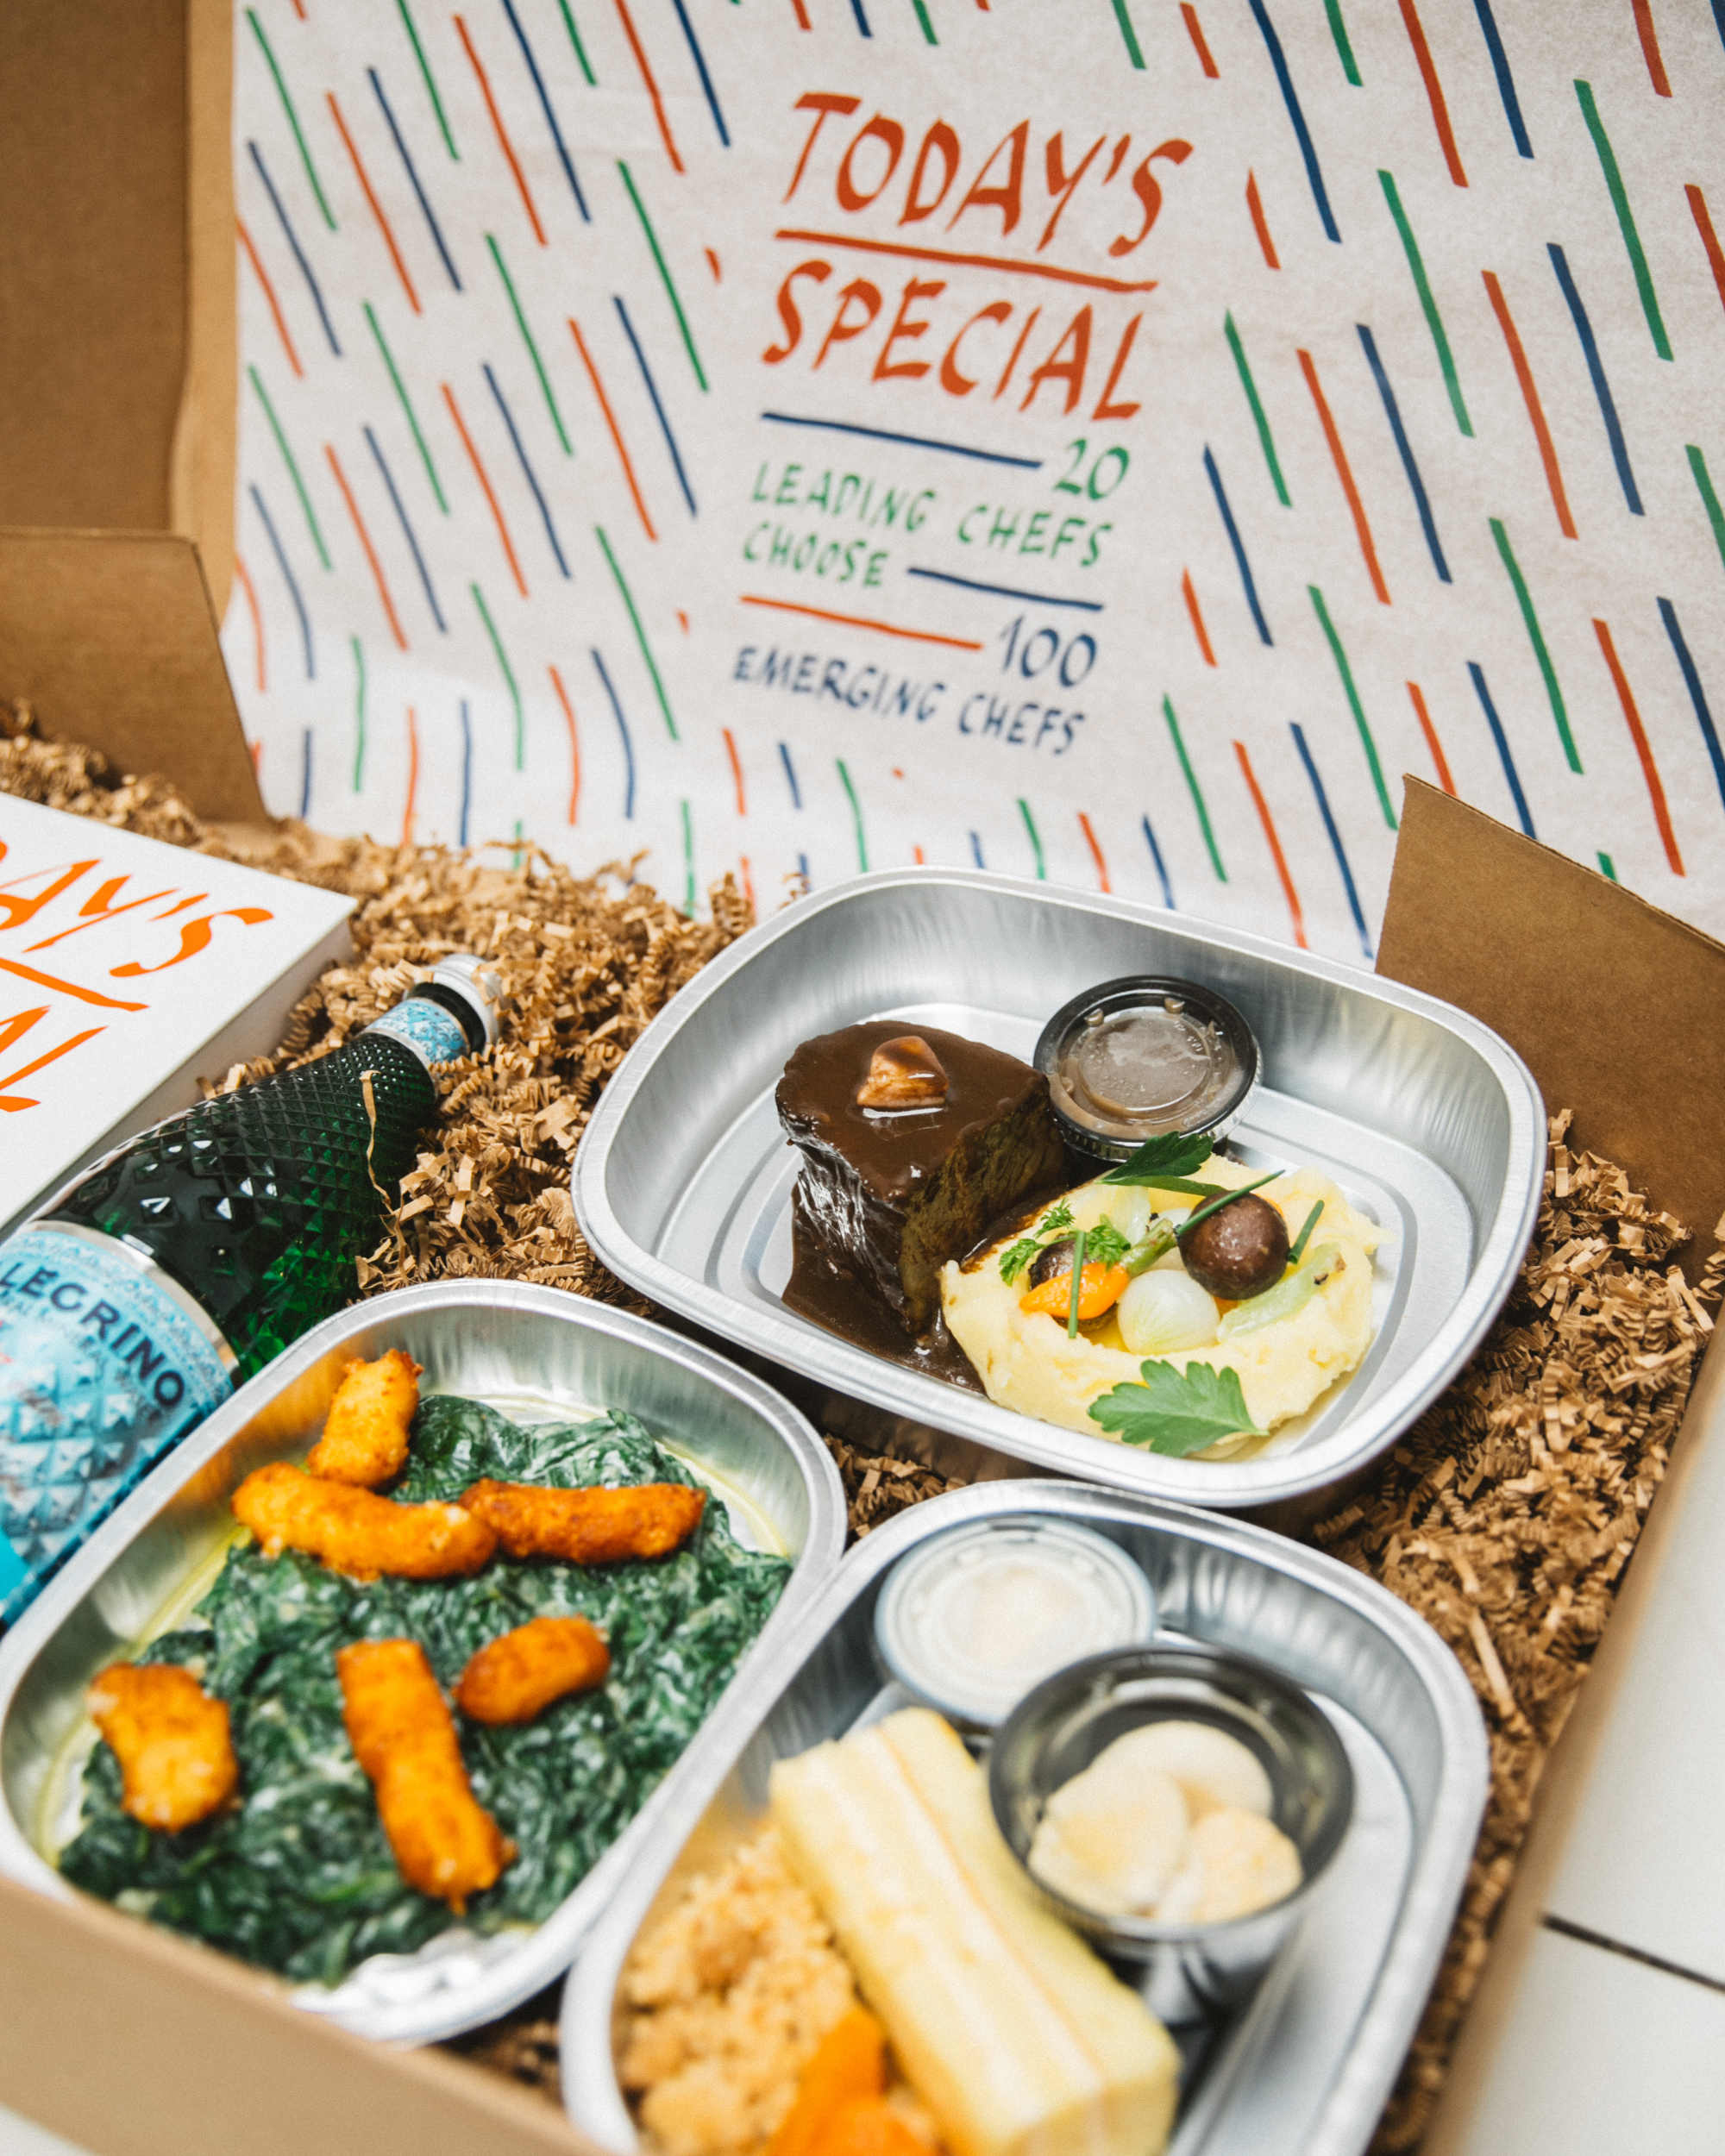 A Today's Special dine-at-home box from chef Gavin Kaysen at Spoon and Stable in Minneapolis